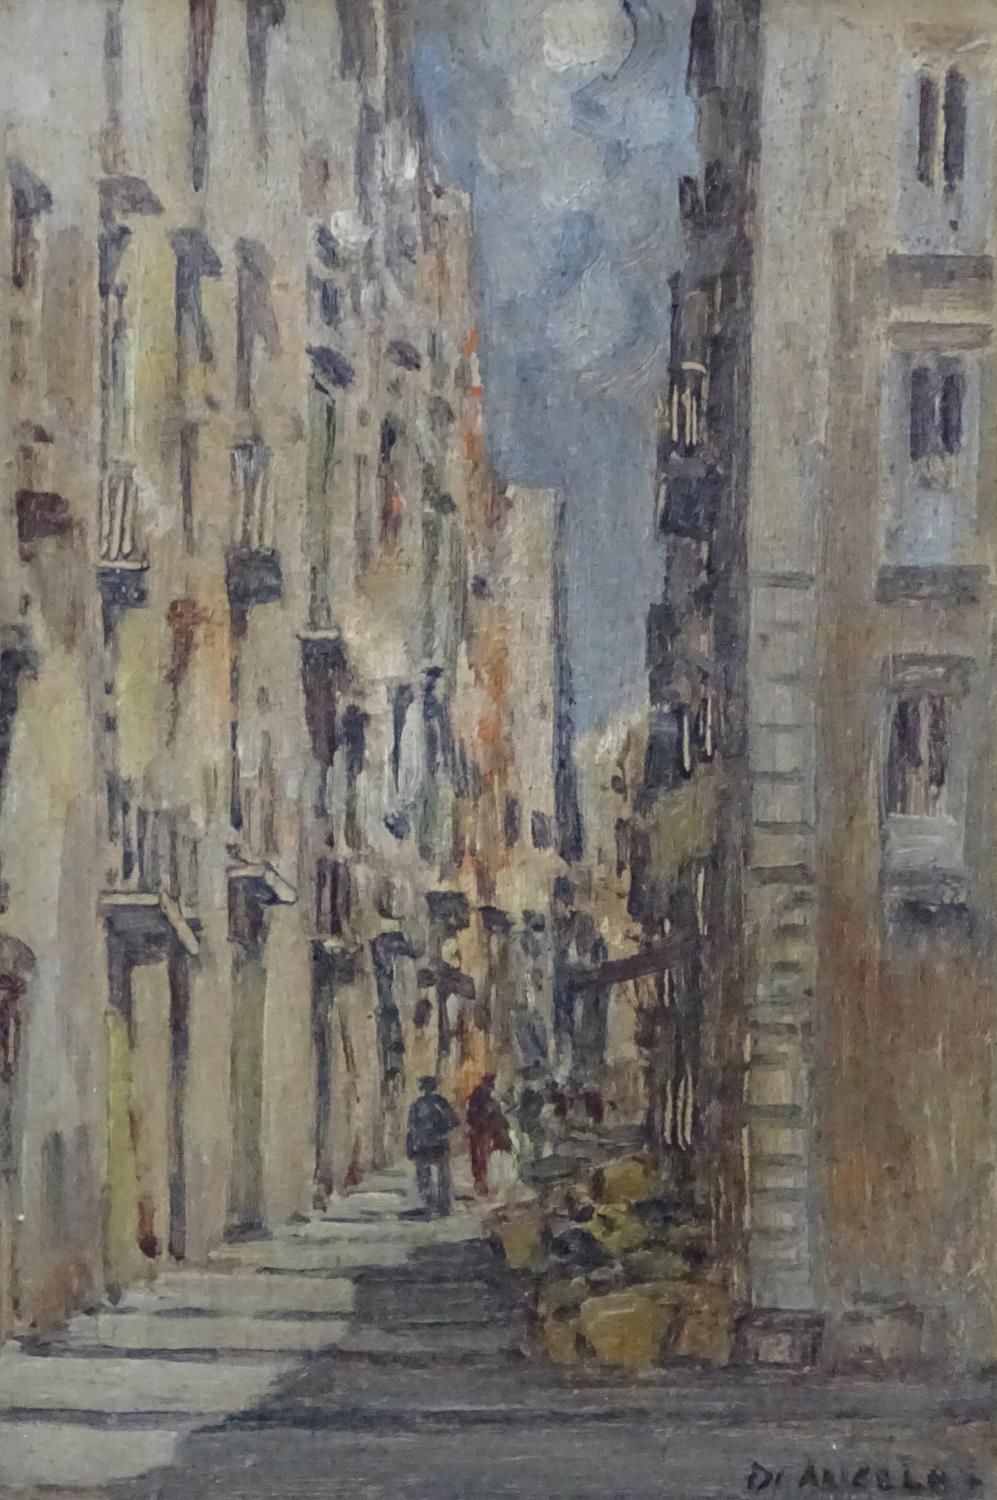 D. Angelos, XIX, Oil on panel, An Italian street scene with figures, Signed lower right. - Image 8 of 8